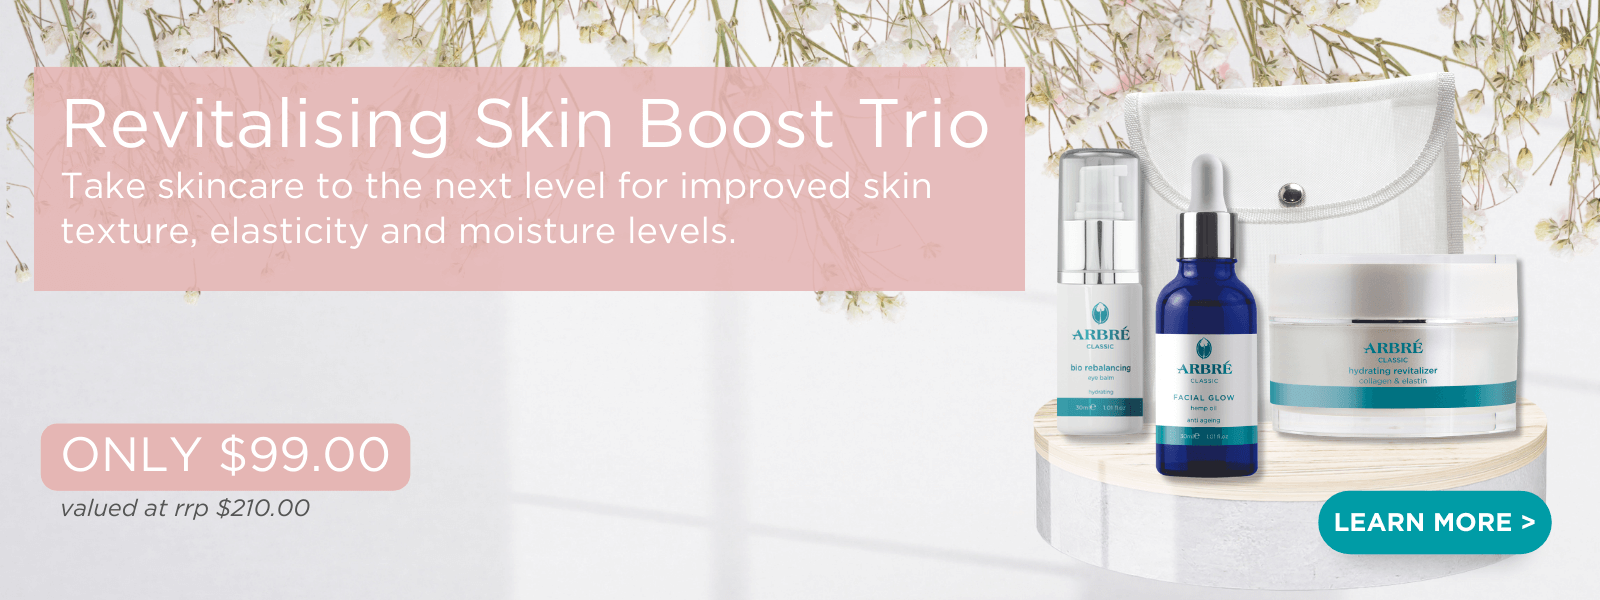 Revitalising Skin Boost Trio Mother's Day Pack